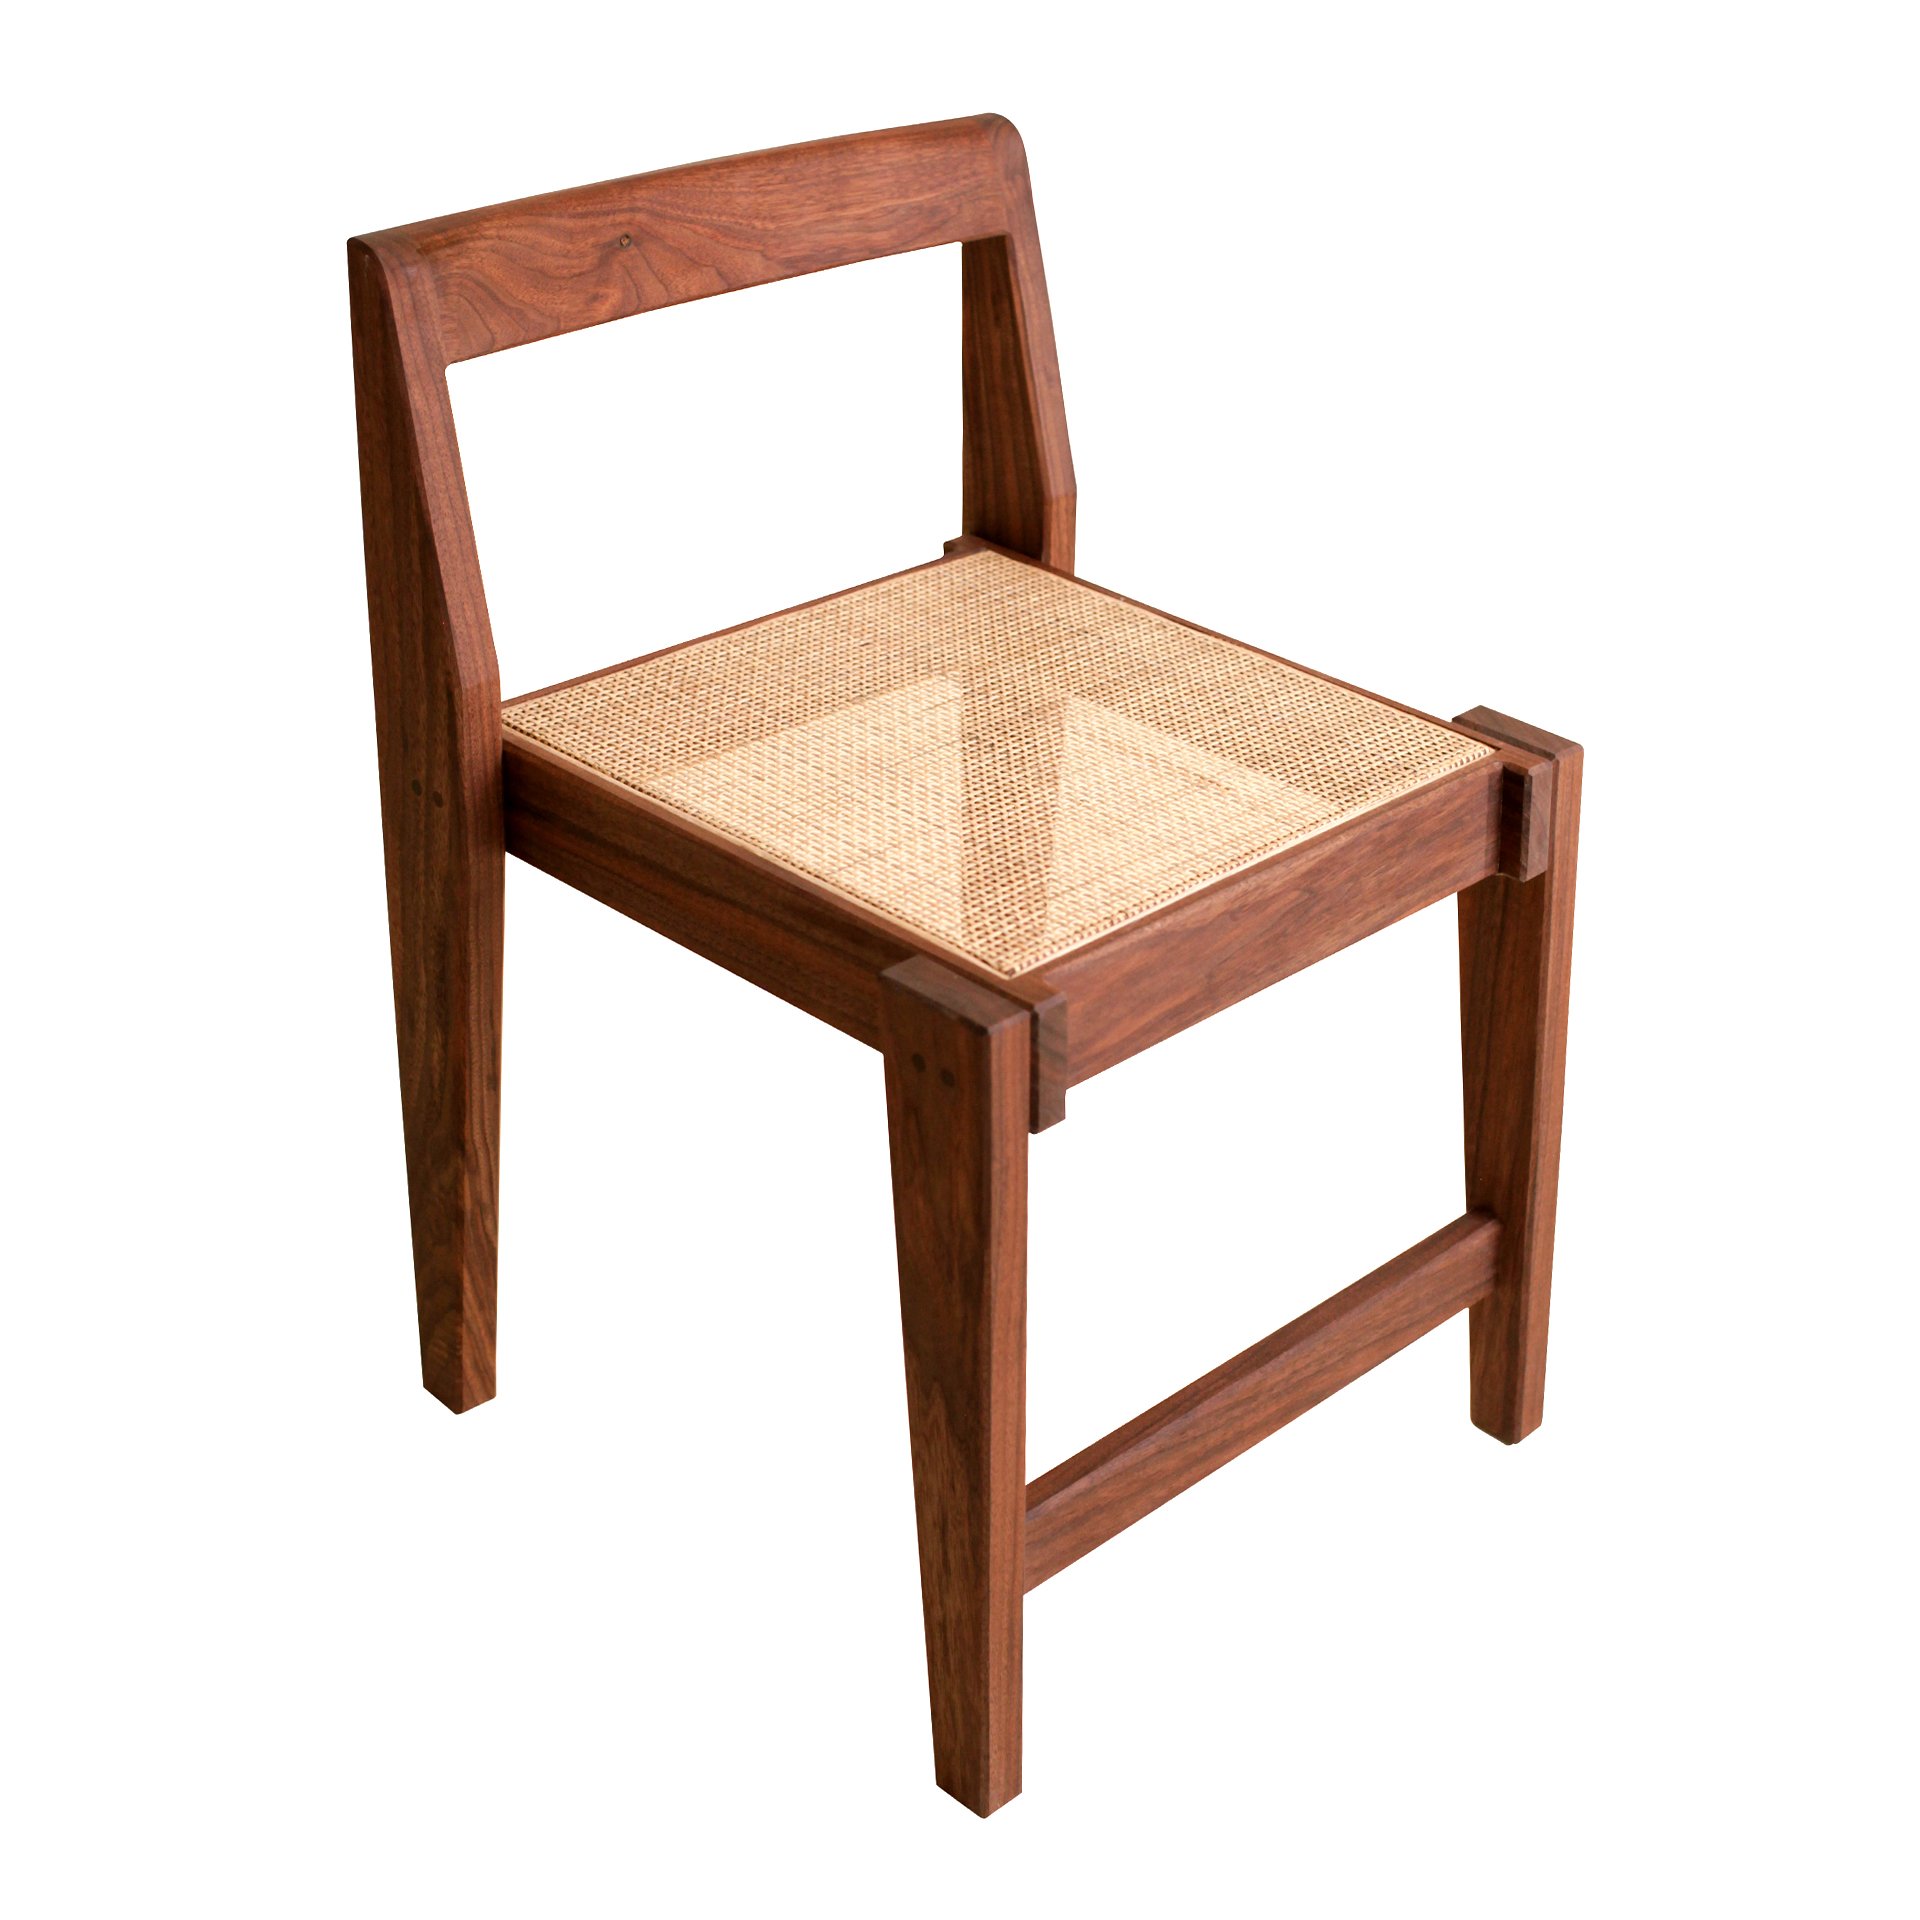 The Gold Tooth Dining Chair